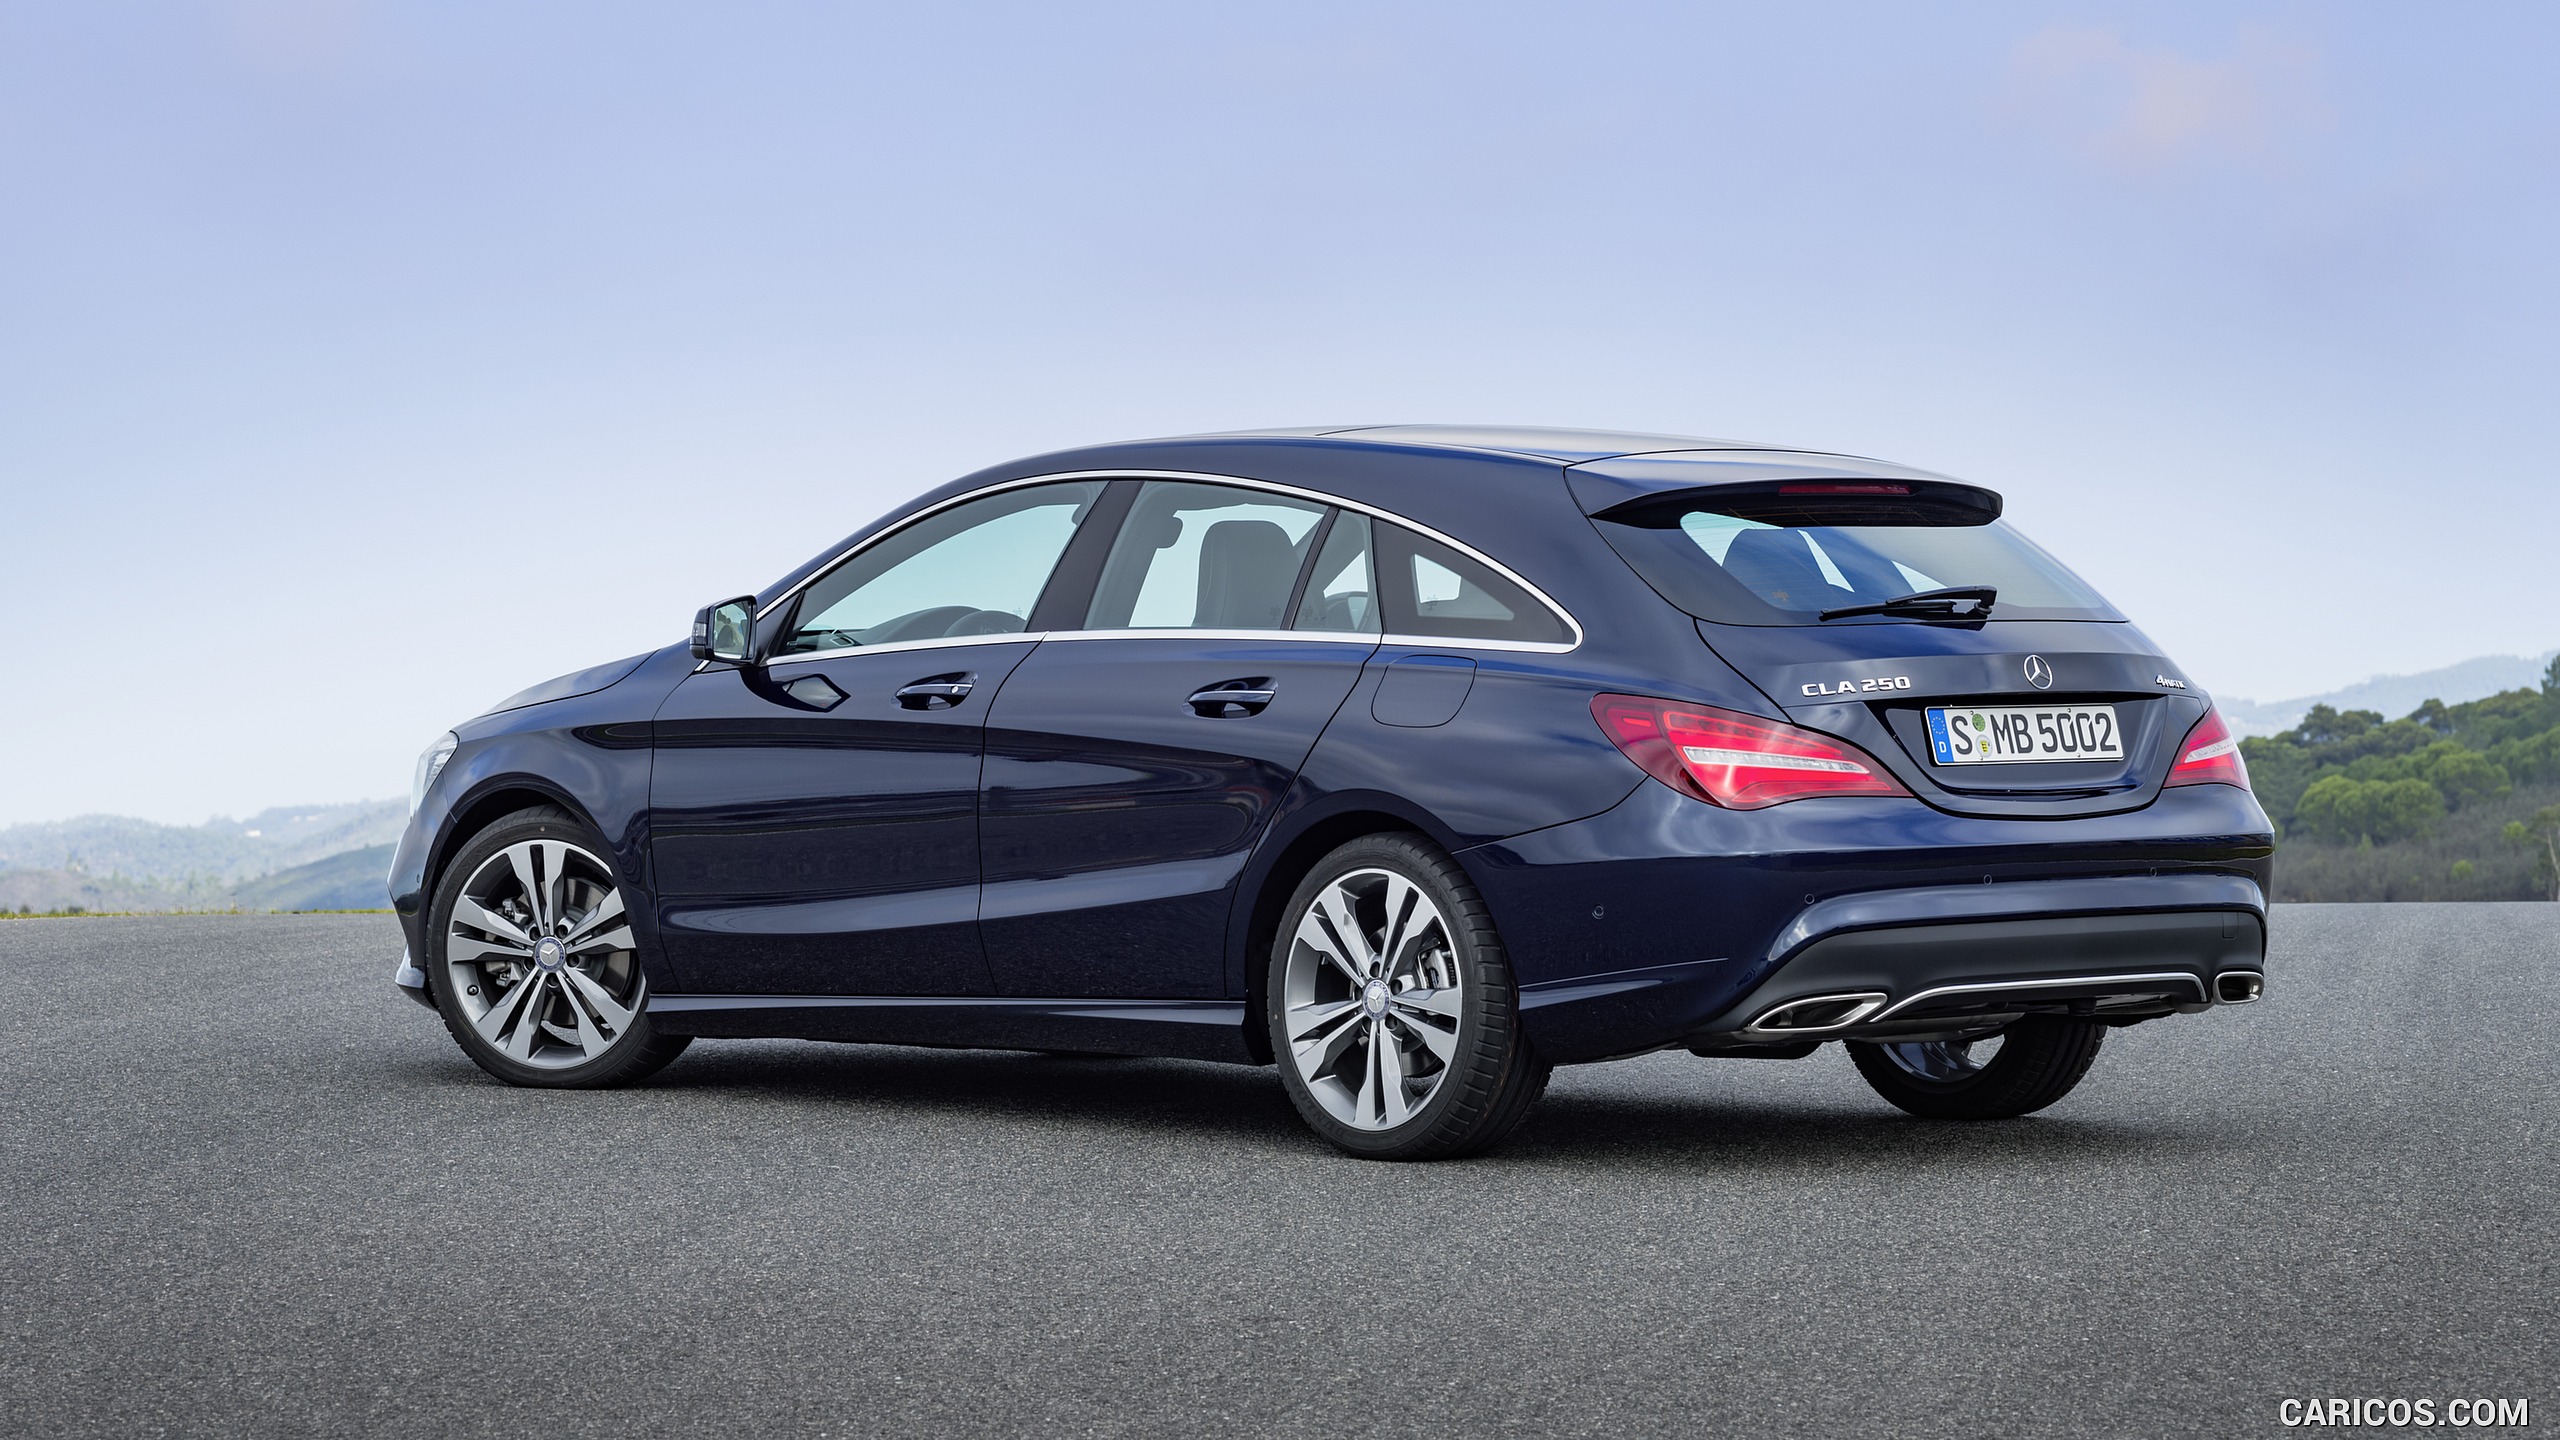 2017 Mercedes-Benz CLA 250 4MATIC Shooting Brake (Chassis: X117, Color: Canvasite blue) - Rear, #14 of 19